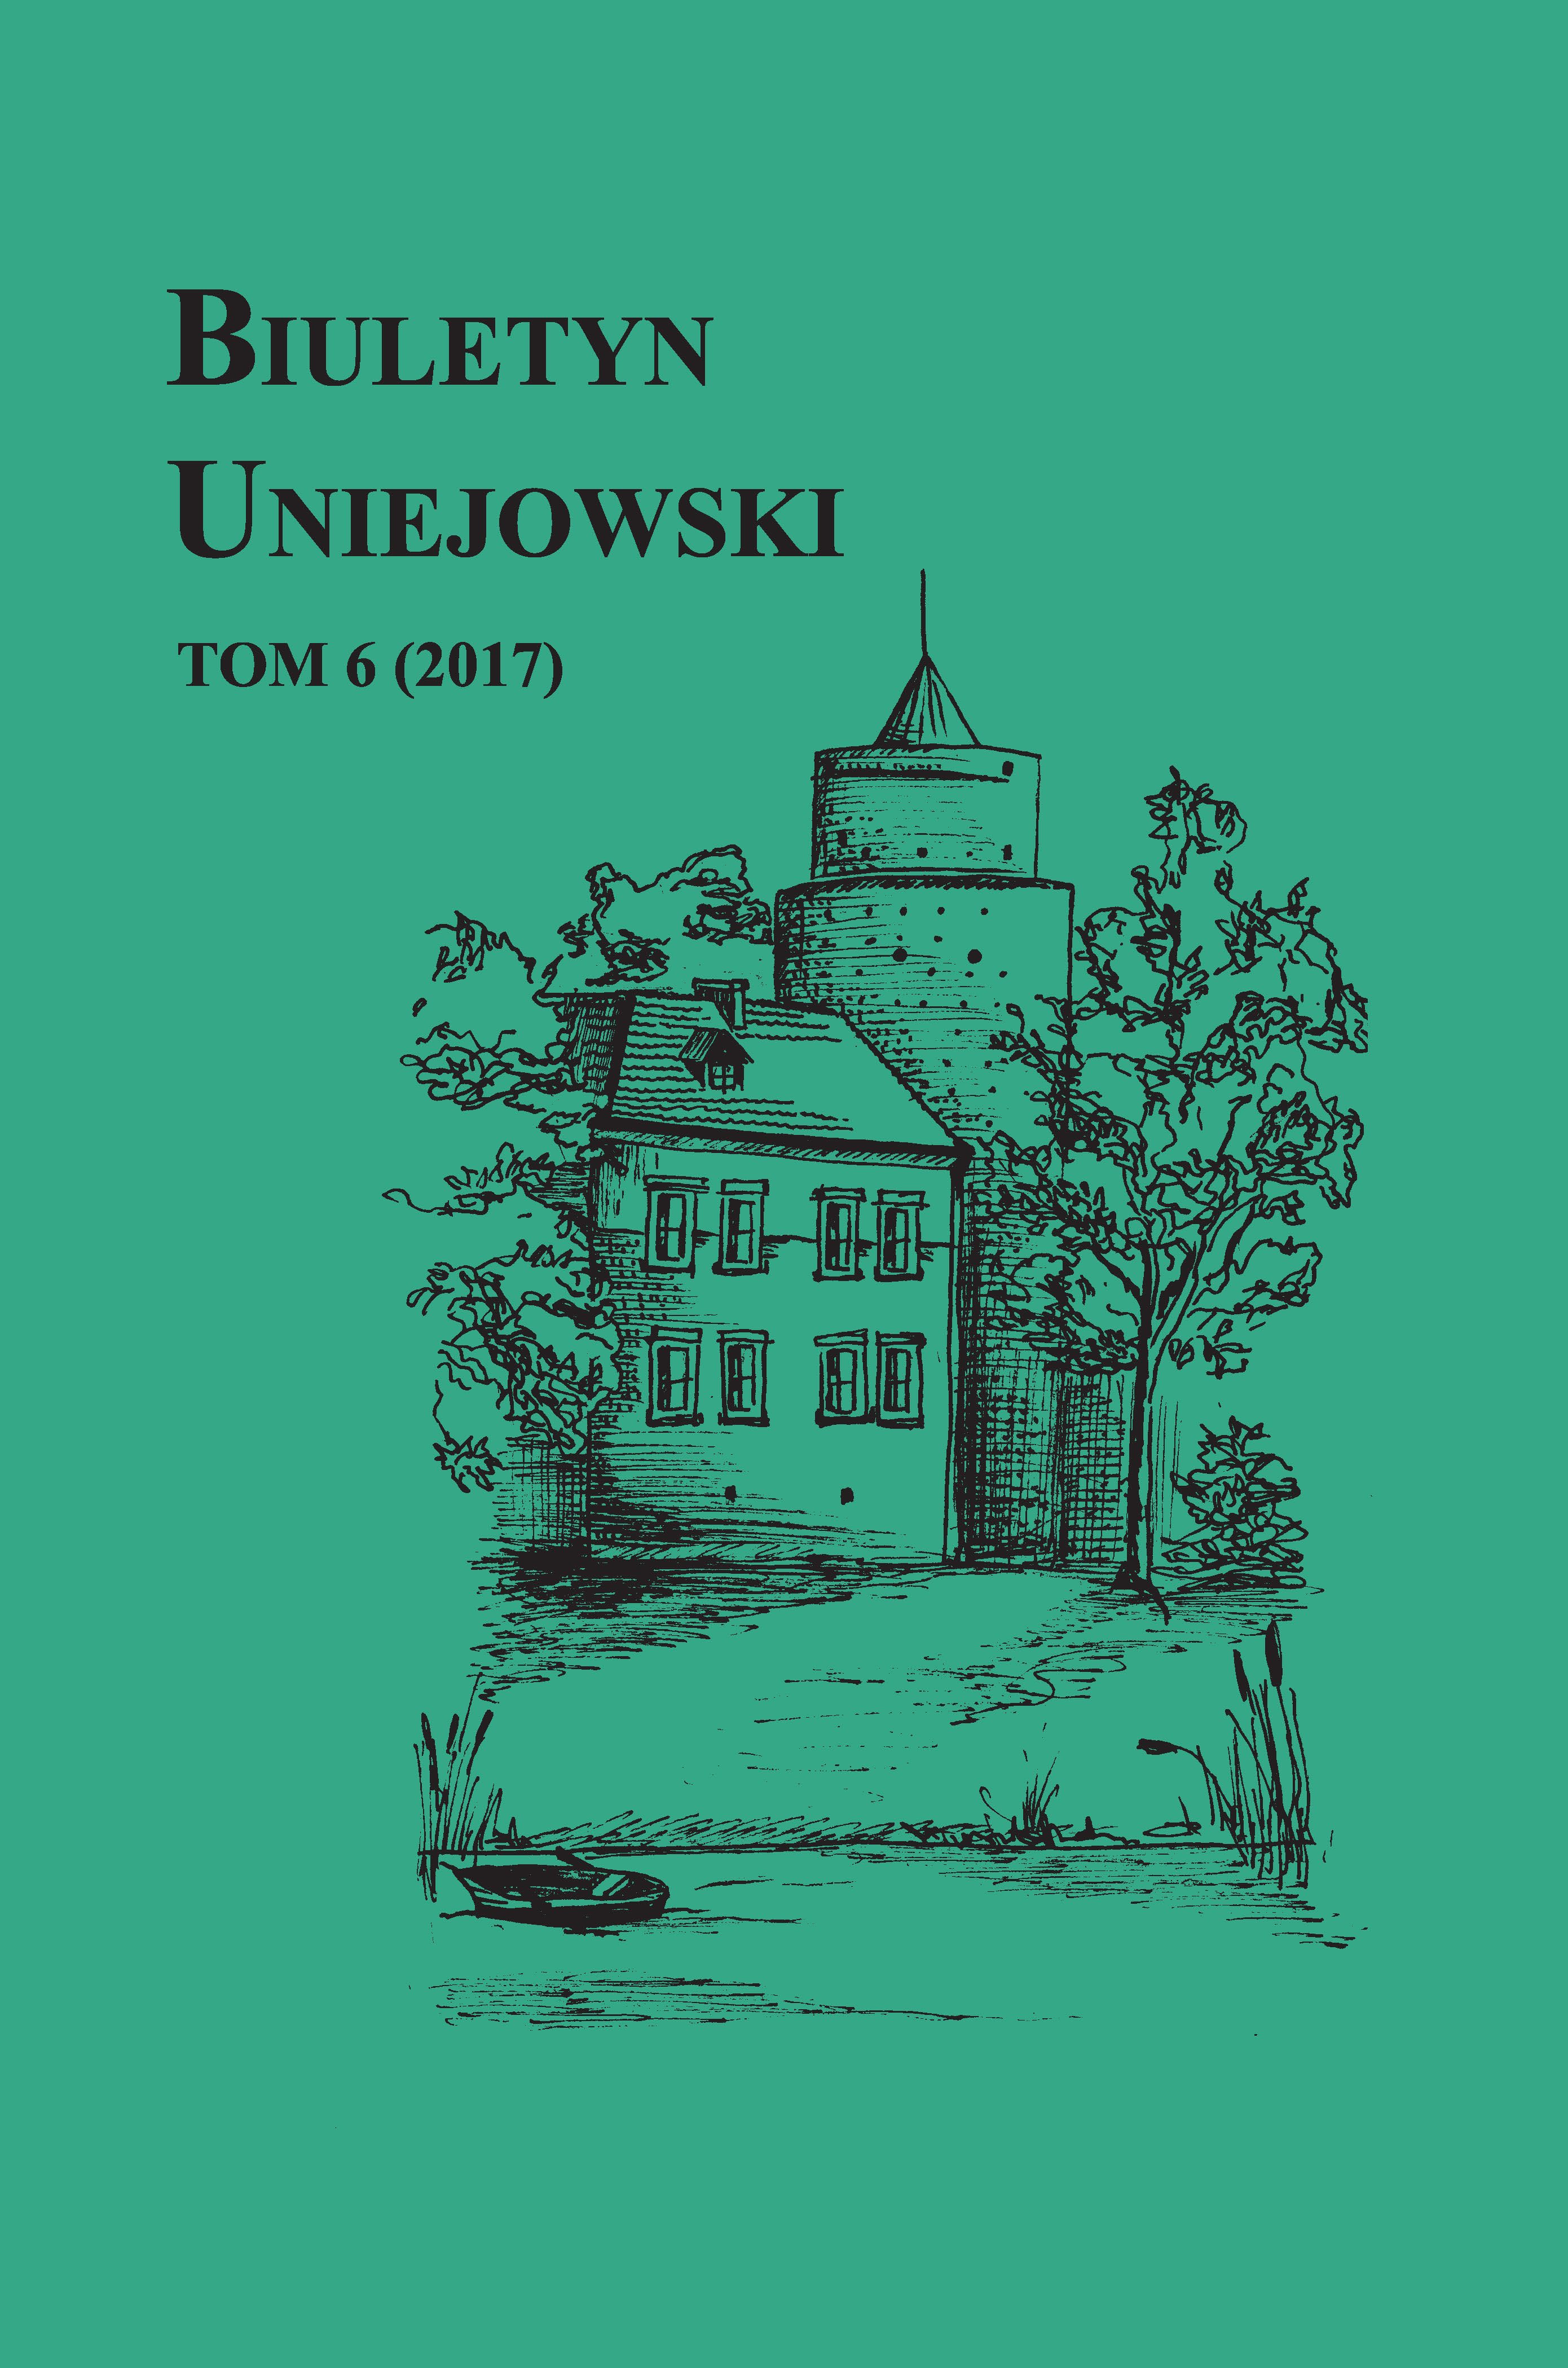 THE POLISH SCOUTING ASSOCIATION
IN THE MUNICIPALITY OF UNIEJÓW Cover Image